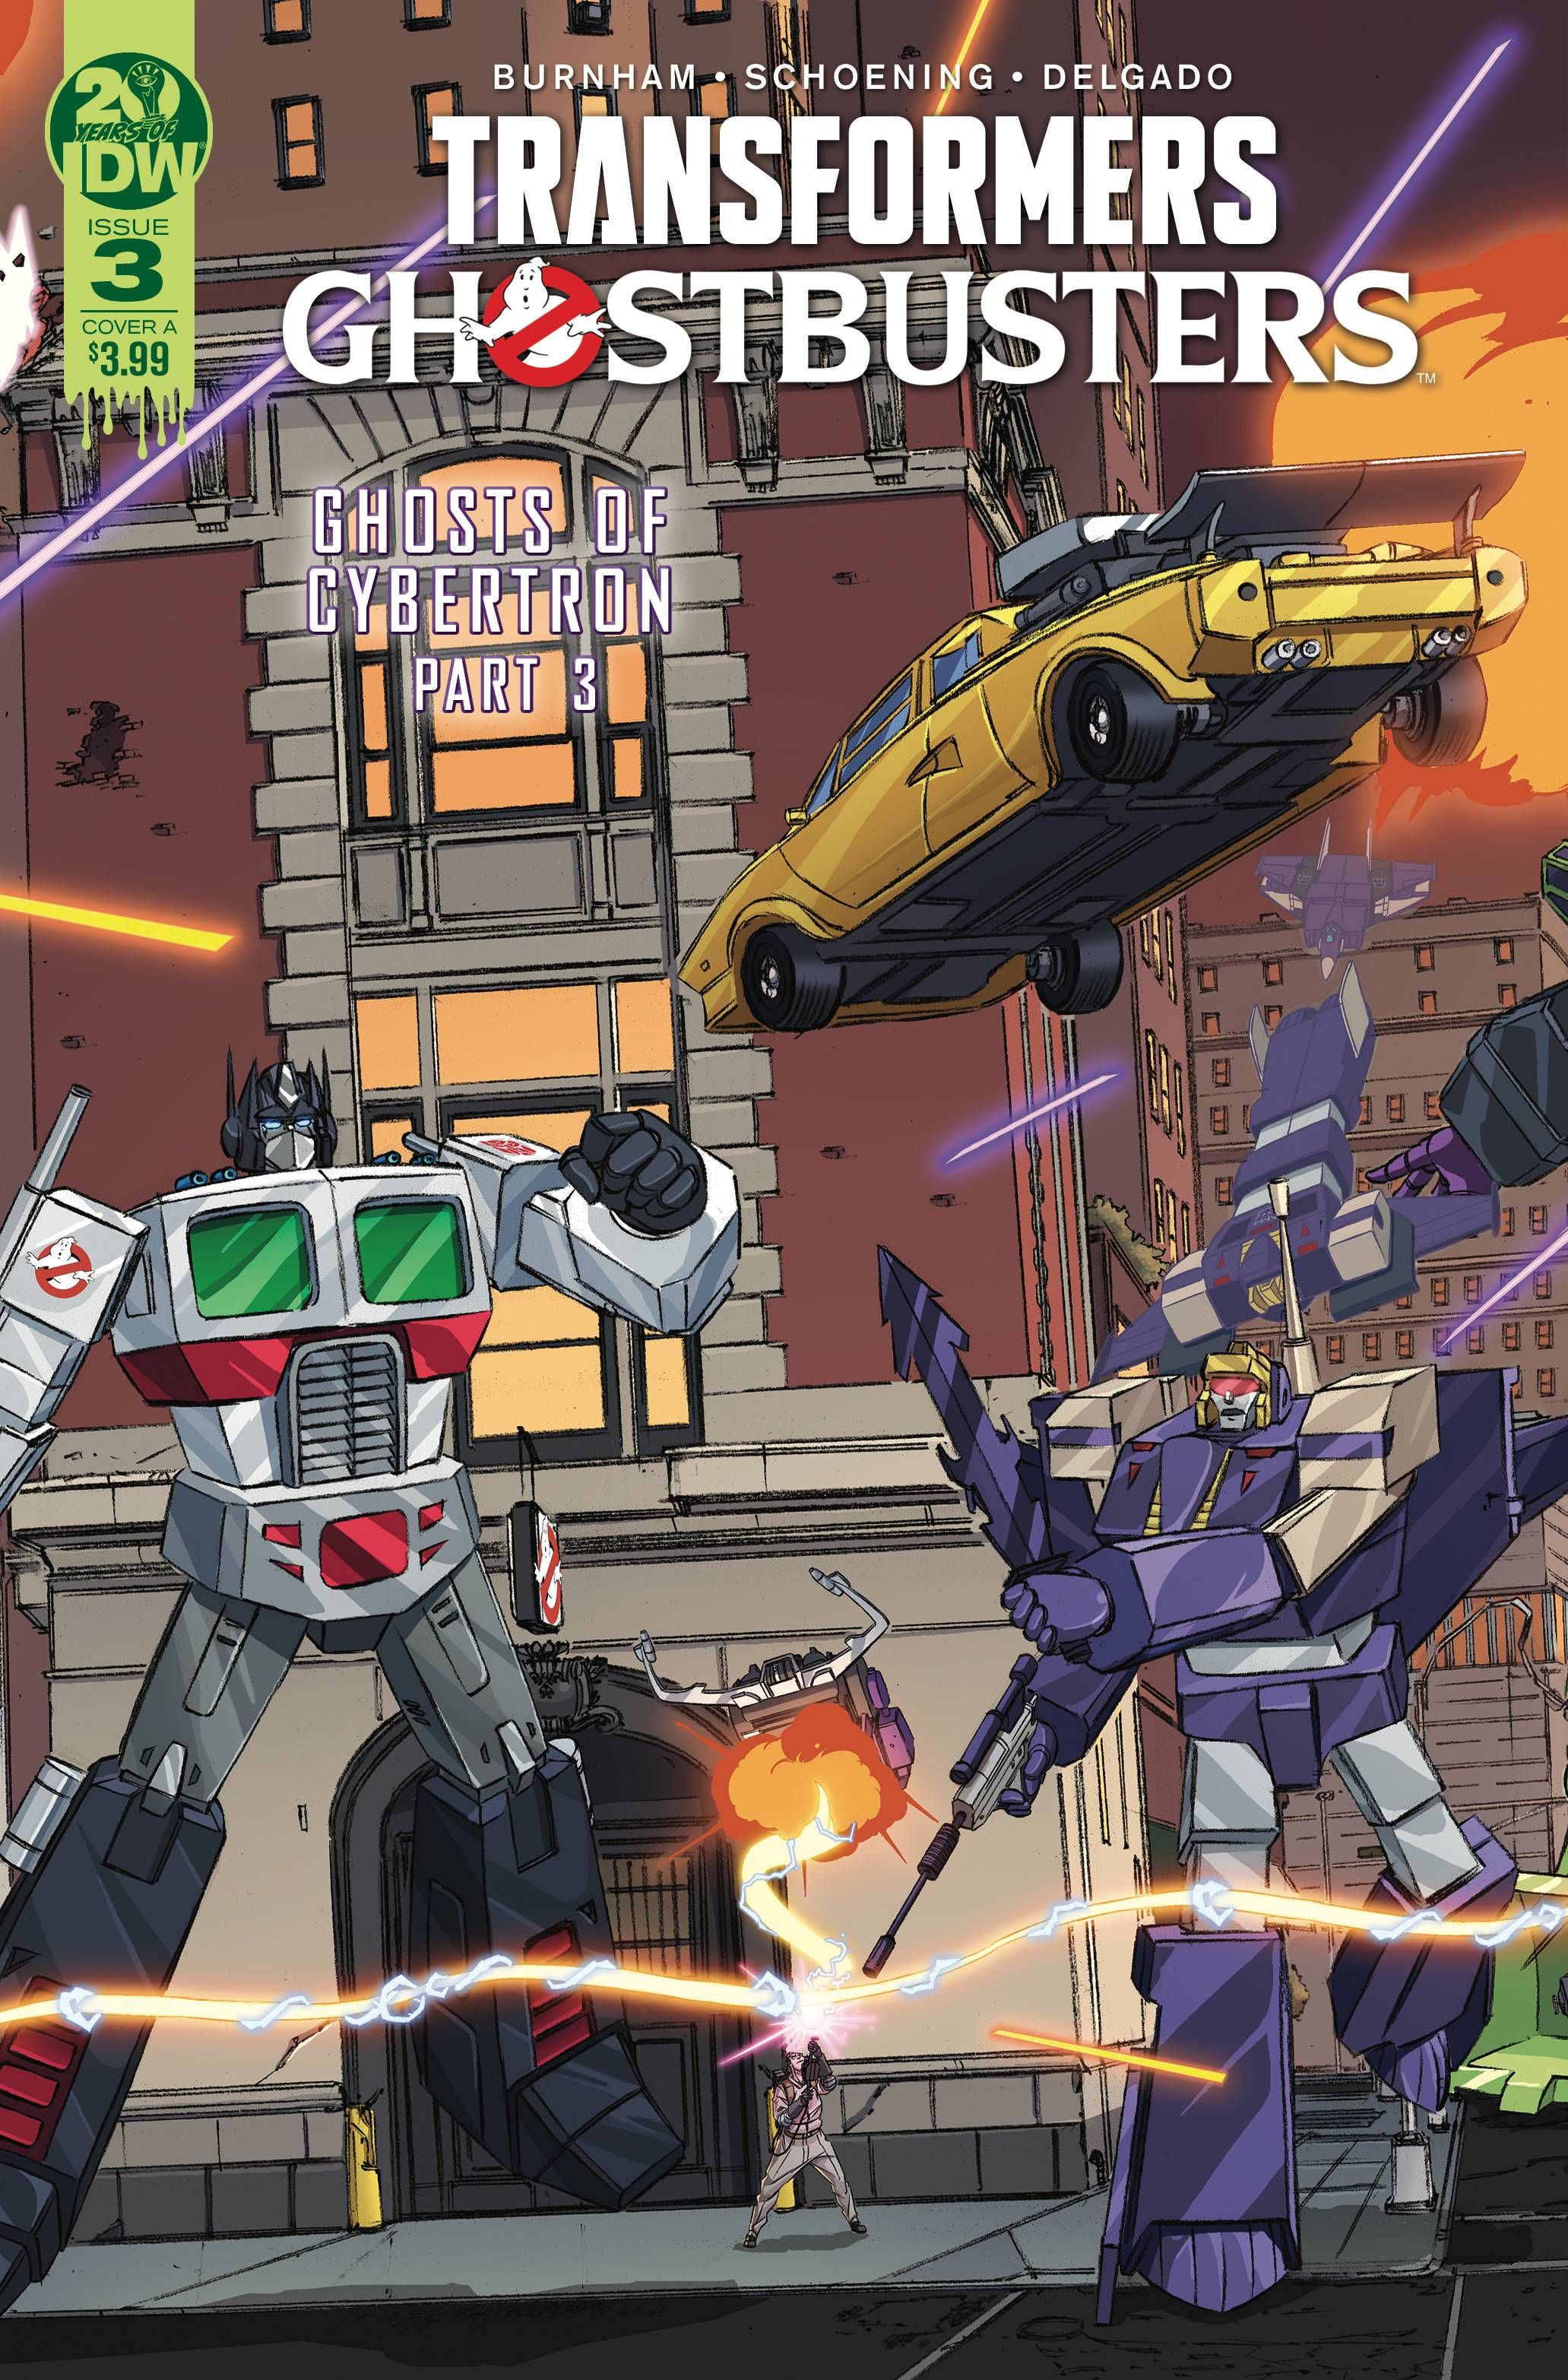 Transformers/Ghostbusters #3 Comic